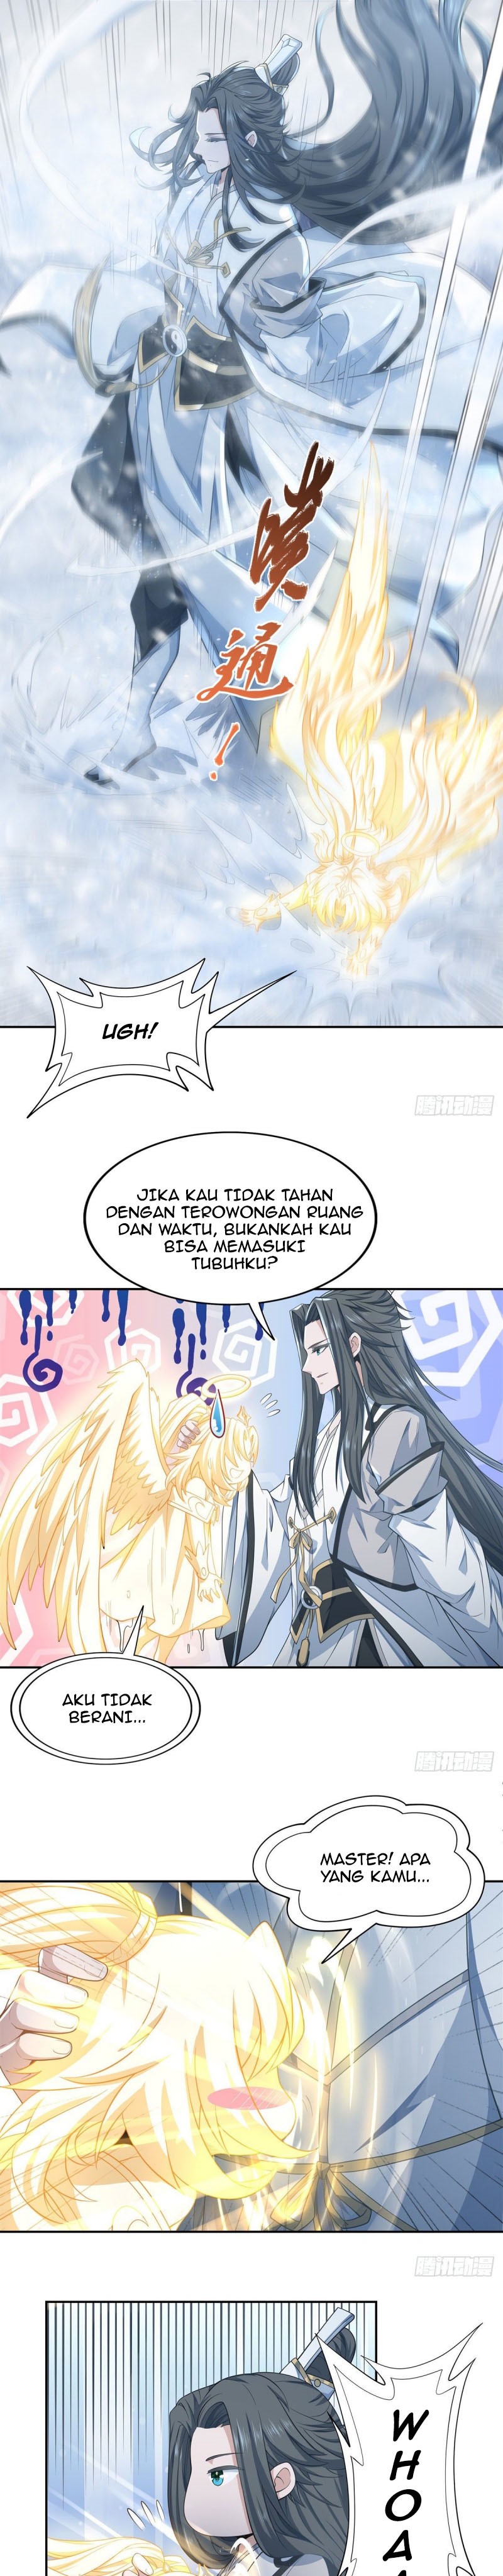 Dilarang COPAS - situs resmi www.mangacanblog.com - Komik my female apprentices are all big shots from the future 001 - chapter 1 2 Indonesia my female apprentices are all big shots from the future 001 - chapter 1 Terbaru 7|Baca Manga Komik Indonesia|Mangacan